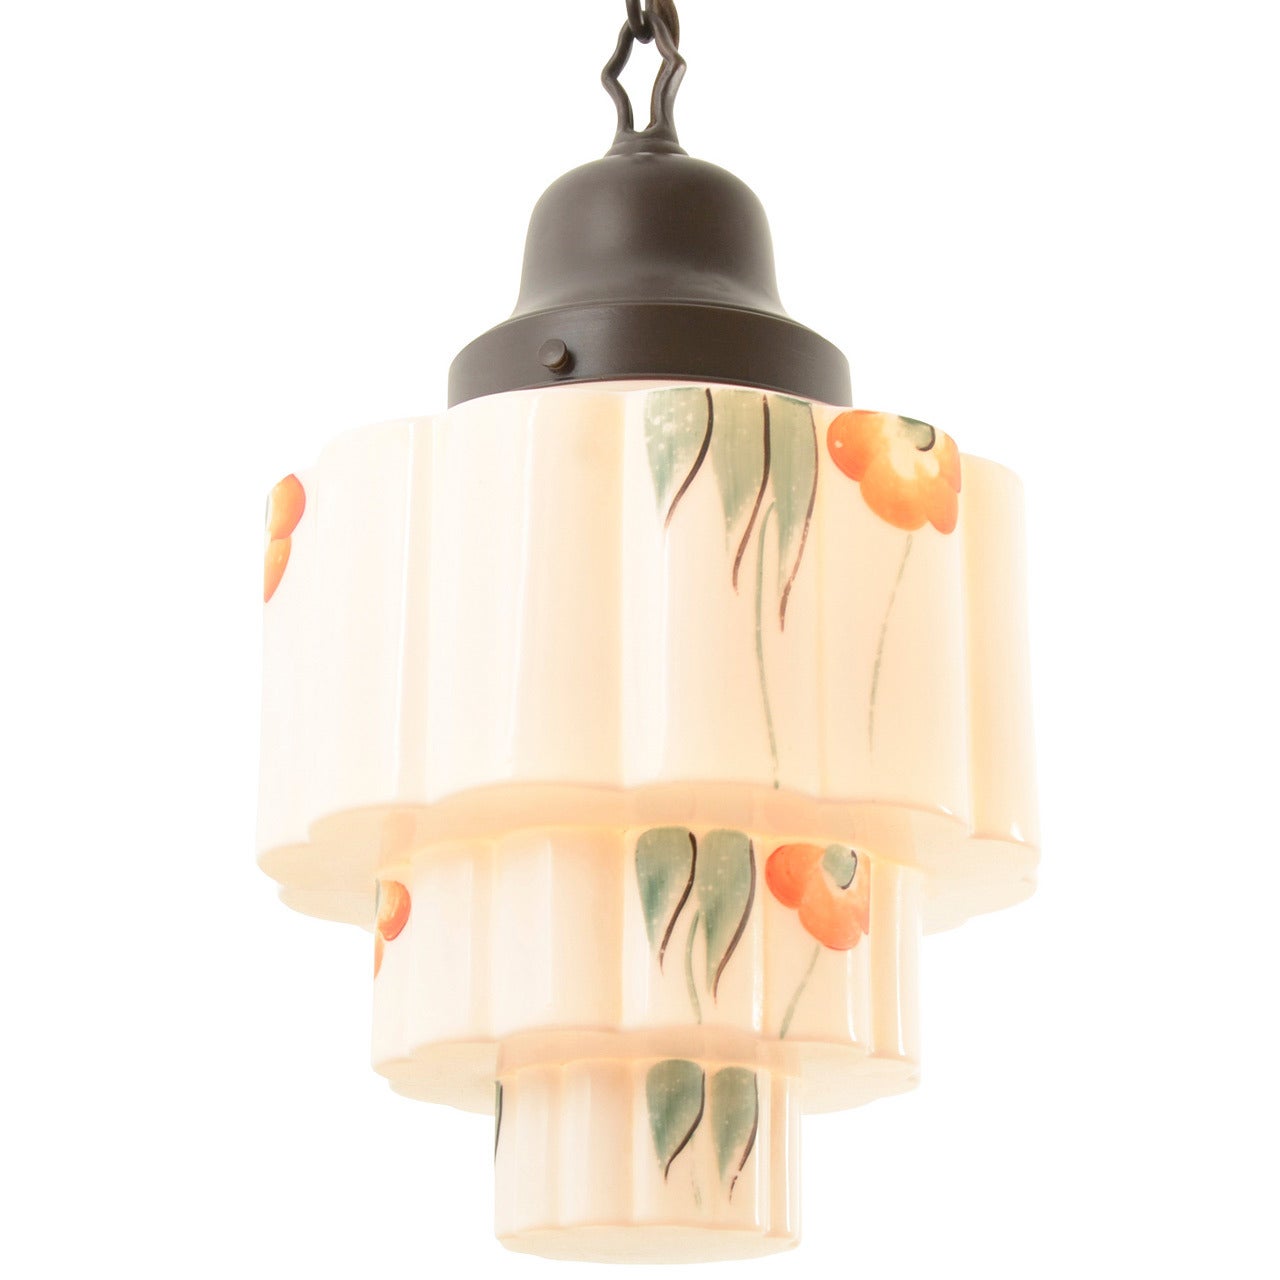 Chain Pendant with Stepped Deco Hand-Painted Shade, circa 1930